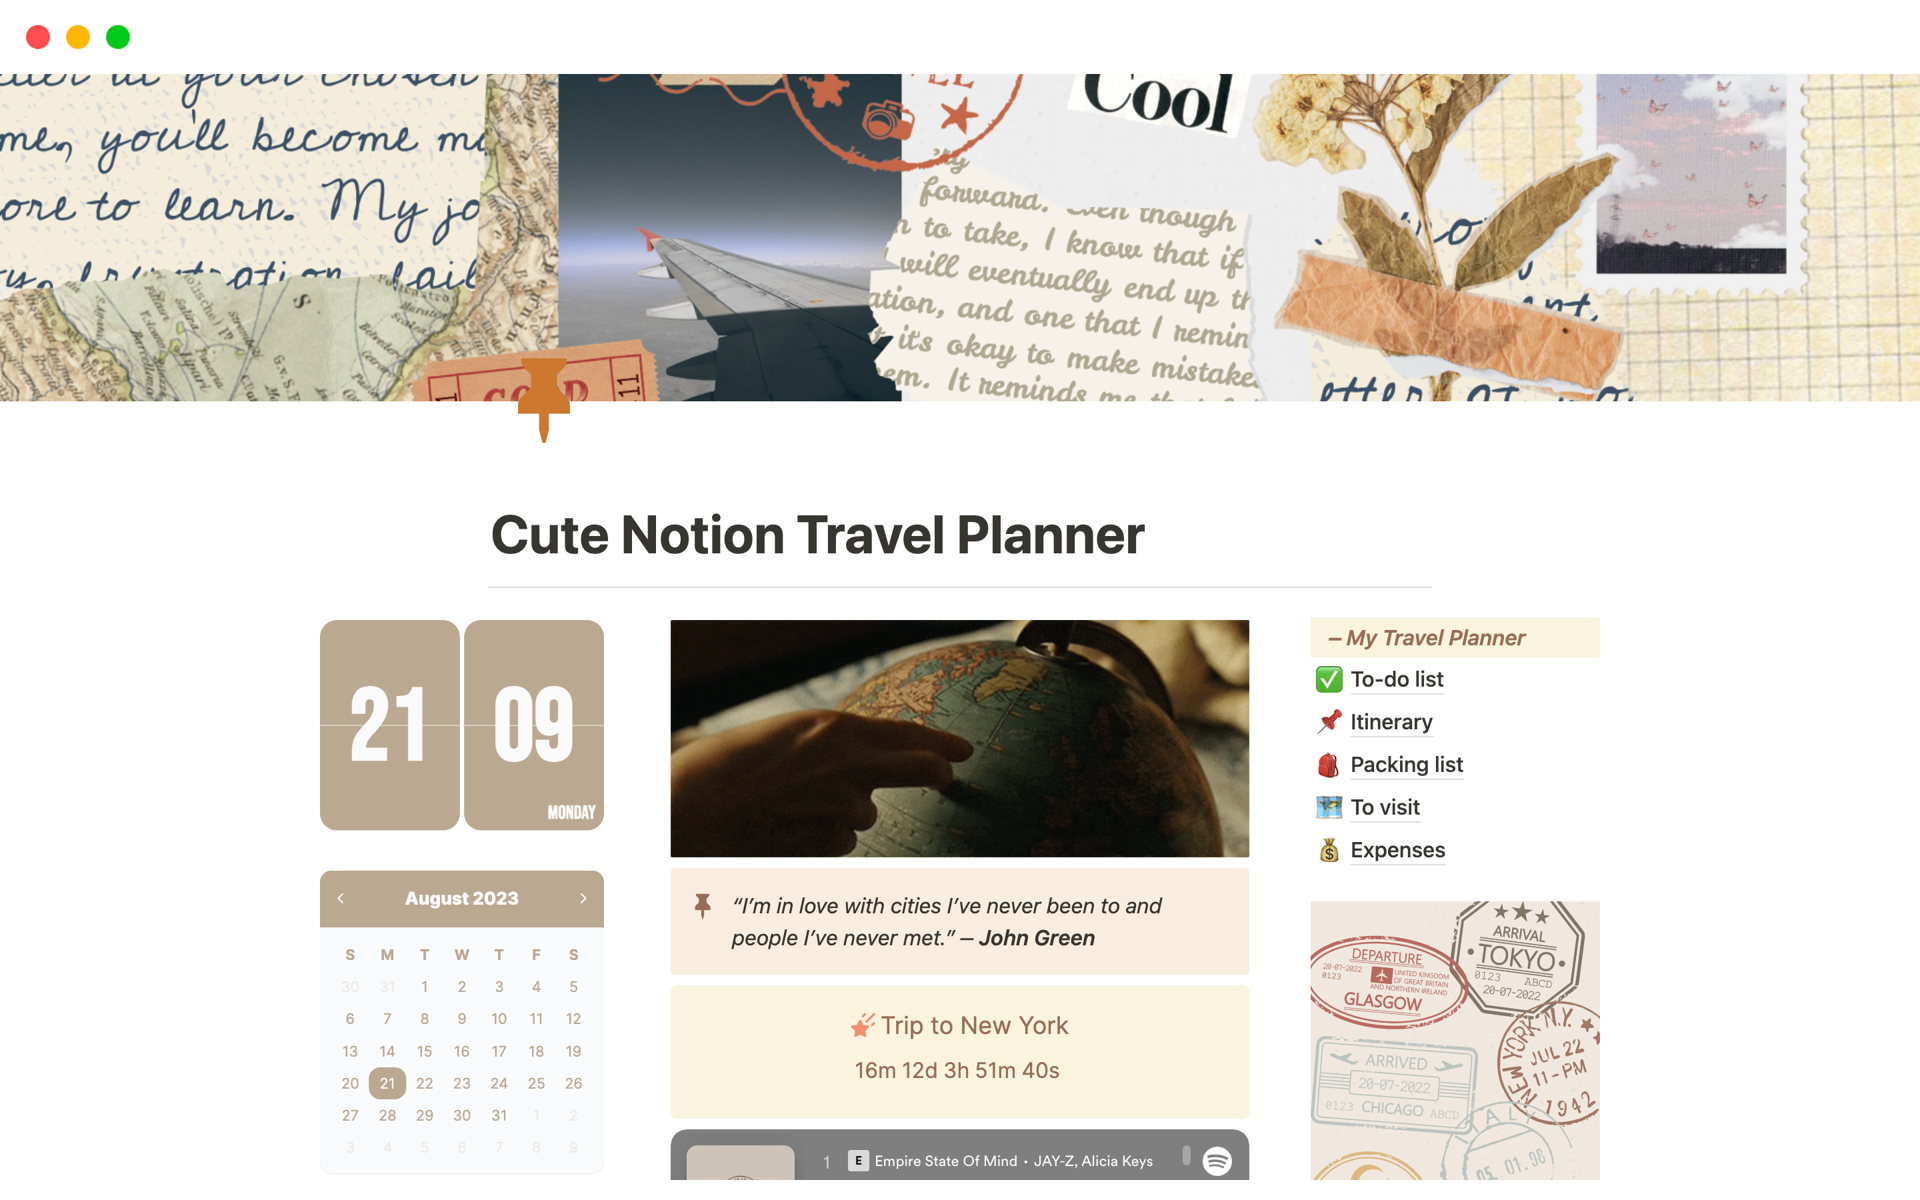 Cute and complete Notion travel planner :)